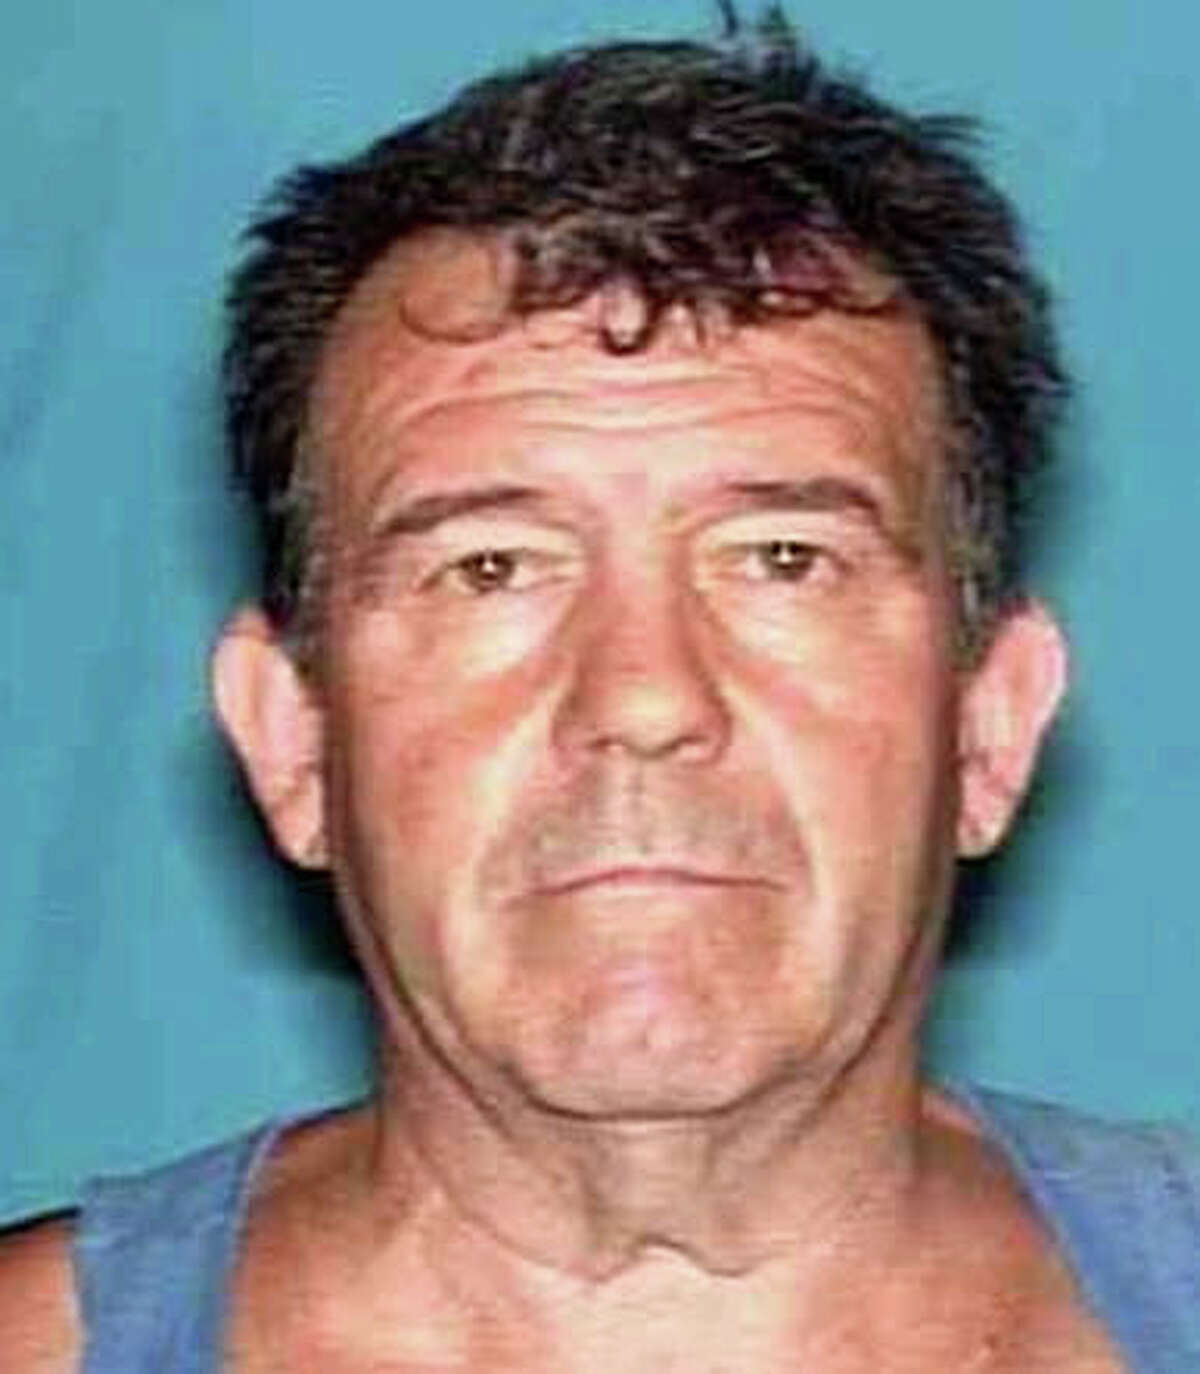 James Gifford: "On January 30, 2003, the deceased body of James Leroy Gifford was discovered outside his Orangefield residence after he did not show up for work. James was a 60 year old single male construction worker who collected numerous tools and other miscellaneous items. He was divorced with four adult children. James was last seen on January 29 2003 returning from work. Evidence at the crime scene revealed James was the victim of a violent attack." (Texas Rangers)